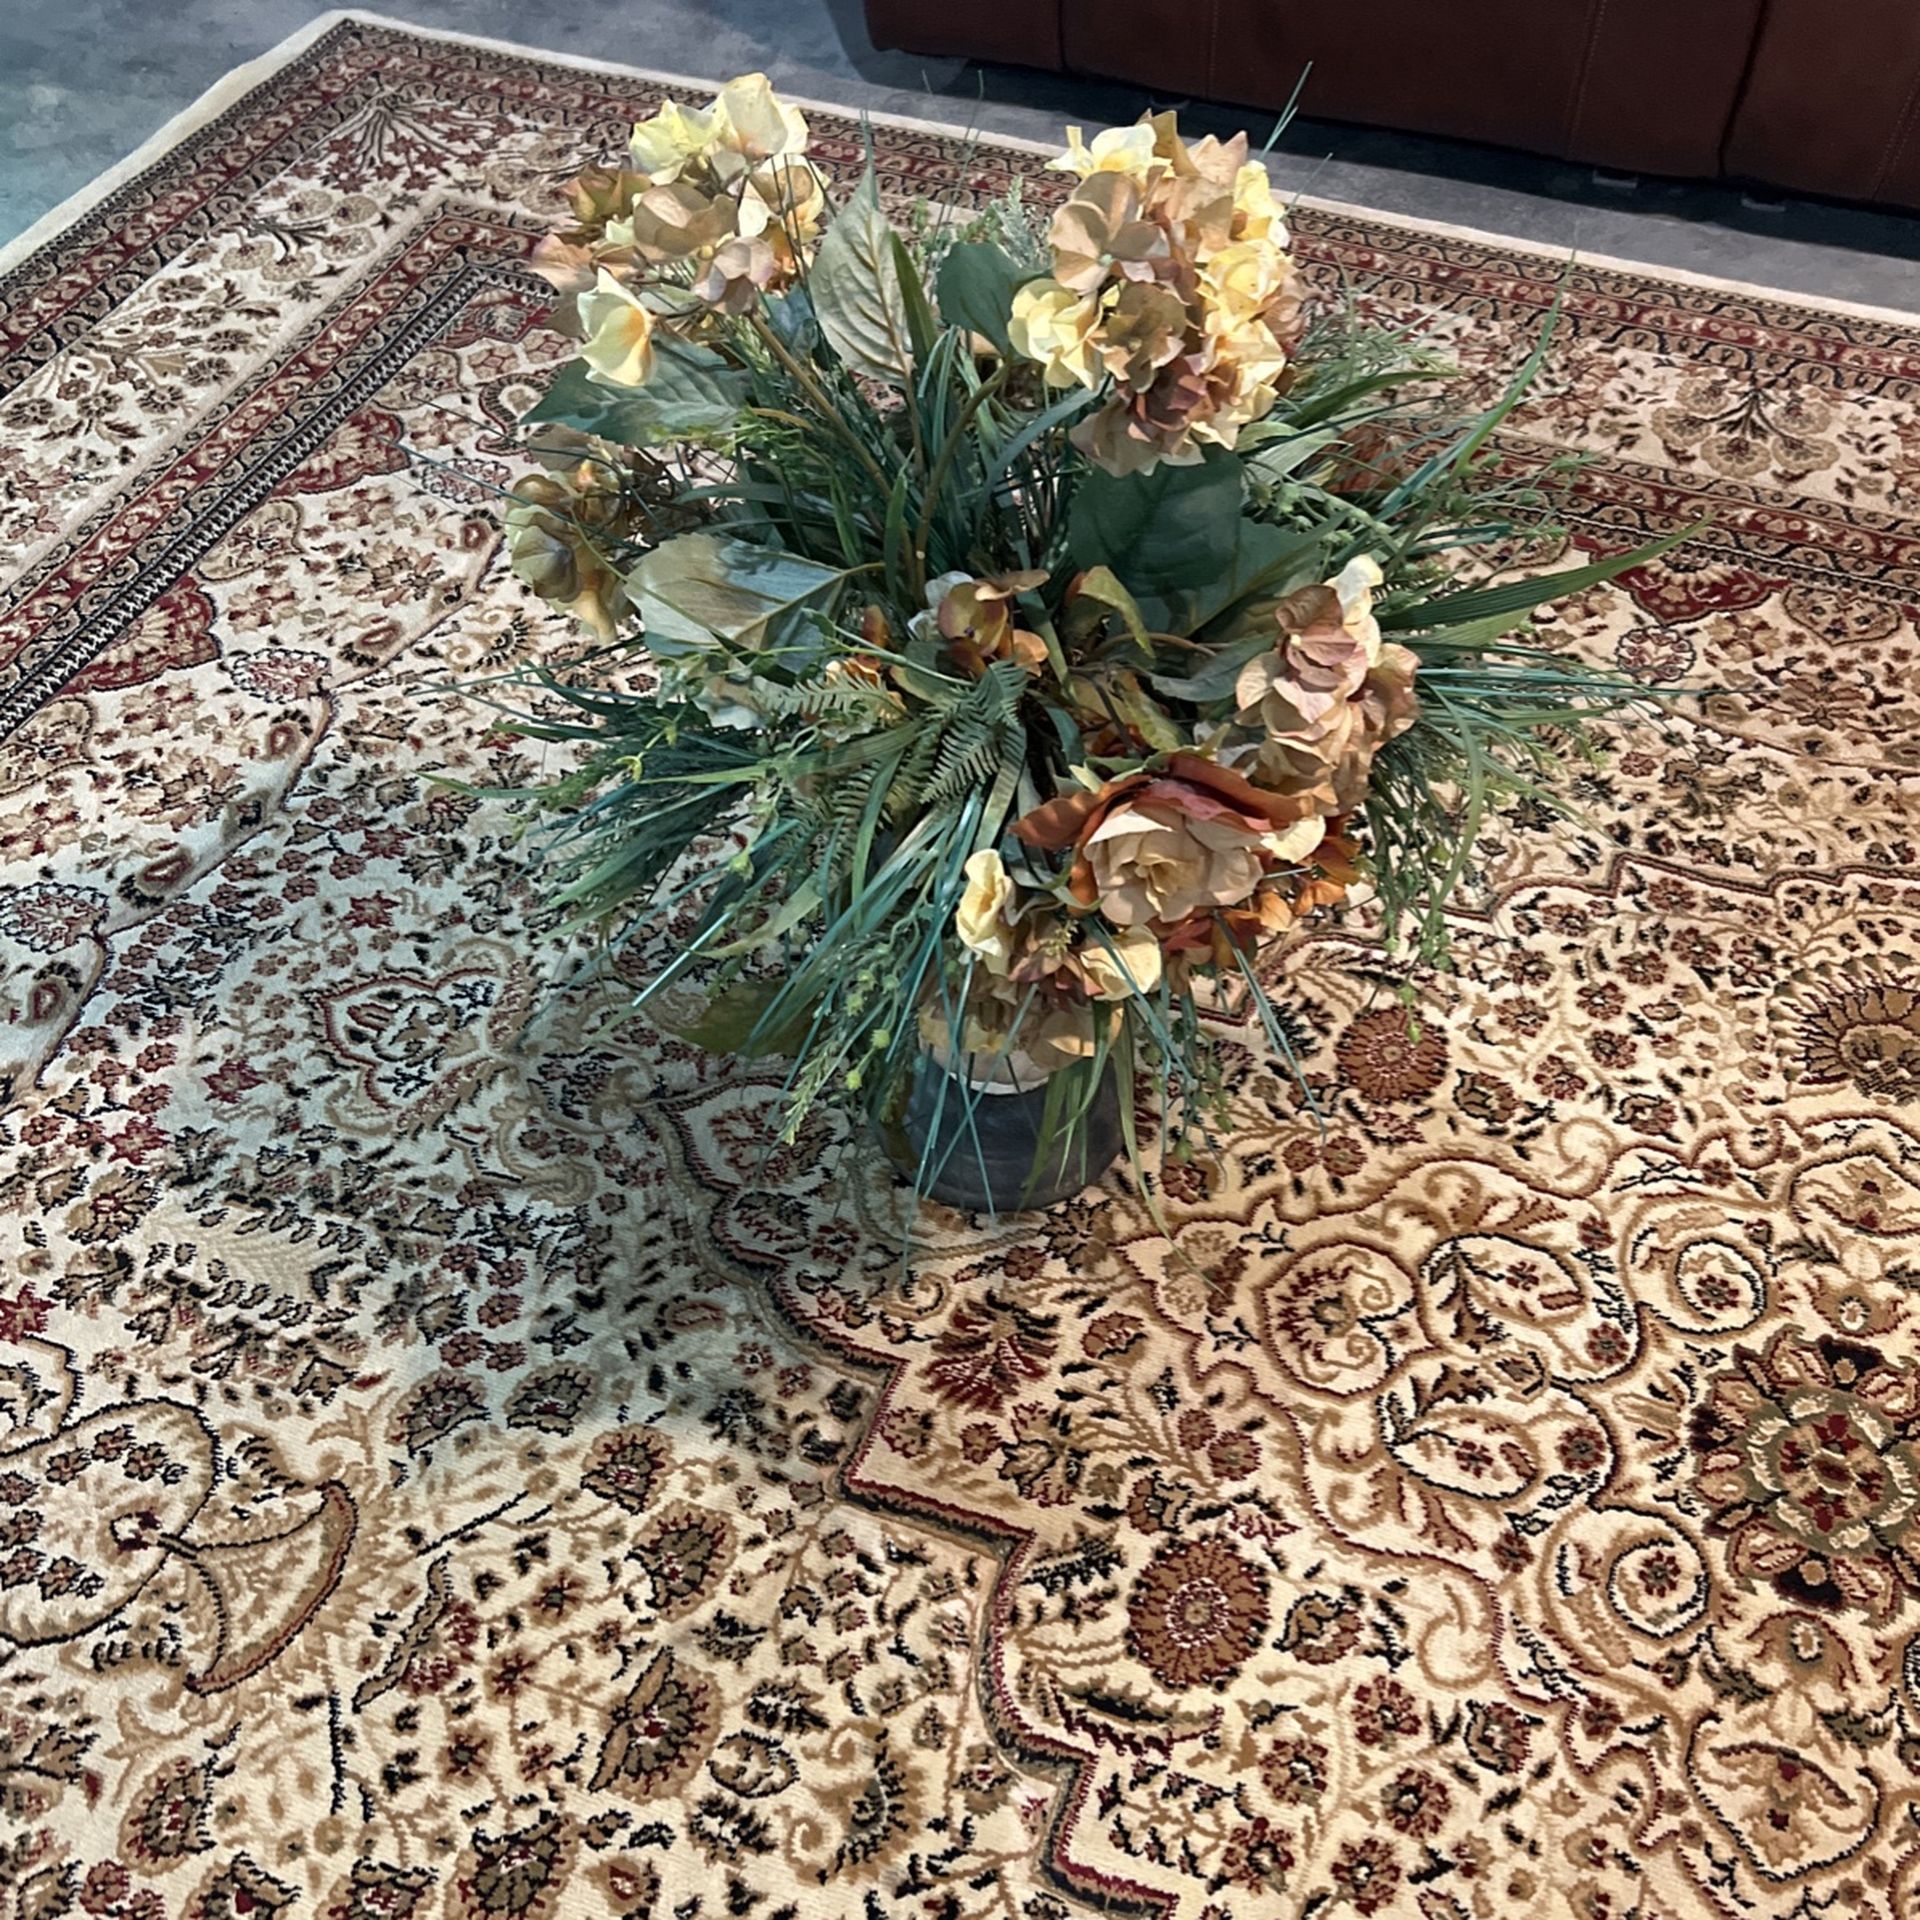 Fake Flowers With The Pot Included